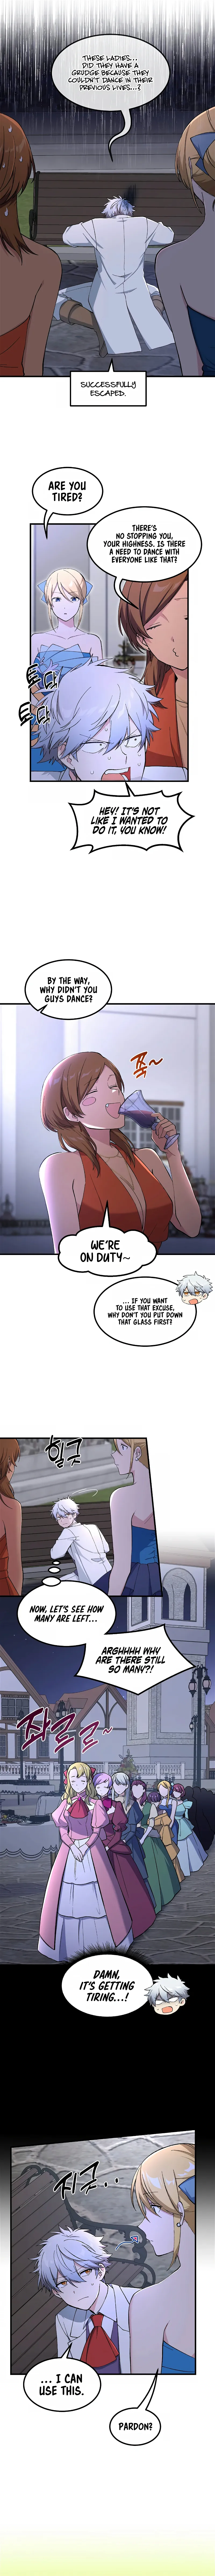 How the Pro in His Past Life Sucks the Sweet Honey Chapter 71 page 10